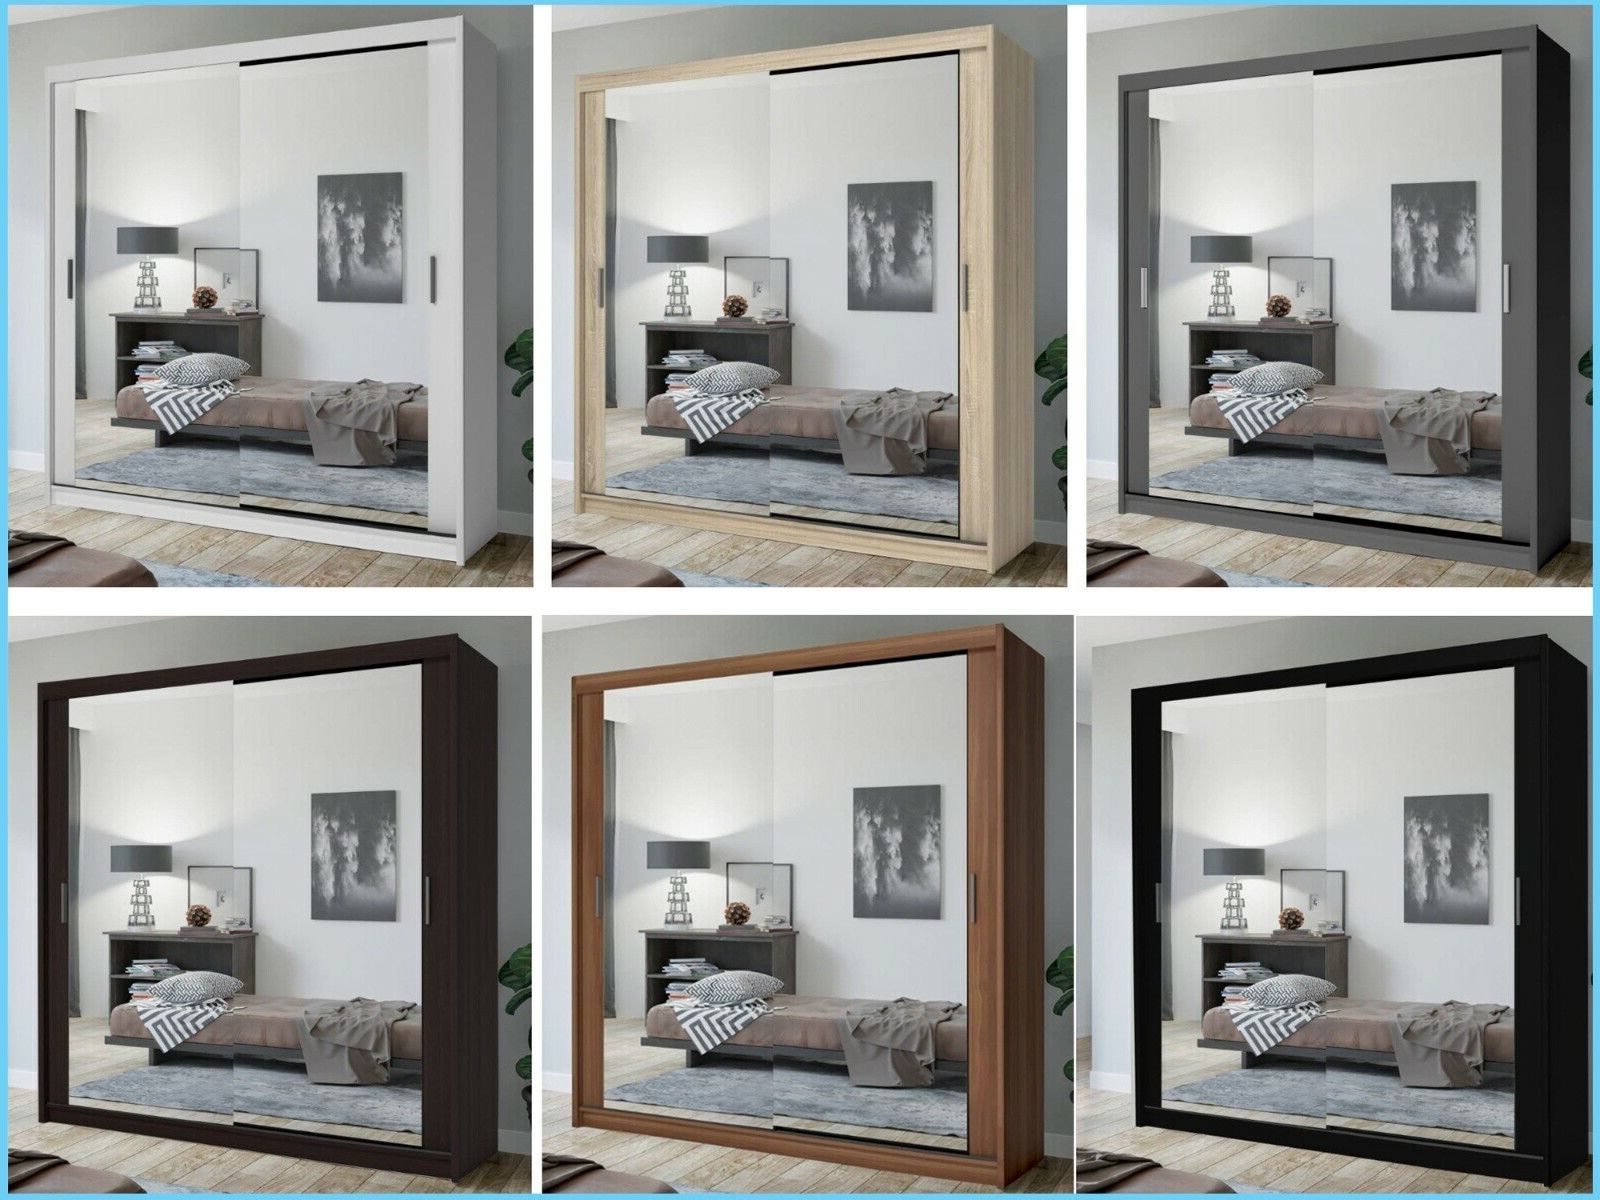 Houston Modern Double Sliding Door Wardrobe 2 Mirrored Cabinet For Bedroom  | Ebay Throughout Double Mirrored Wardrobes (Gallery 16 of 20)